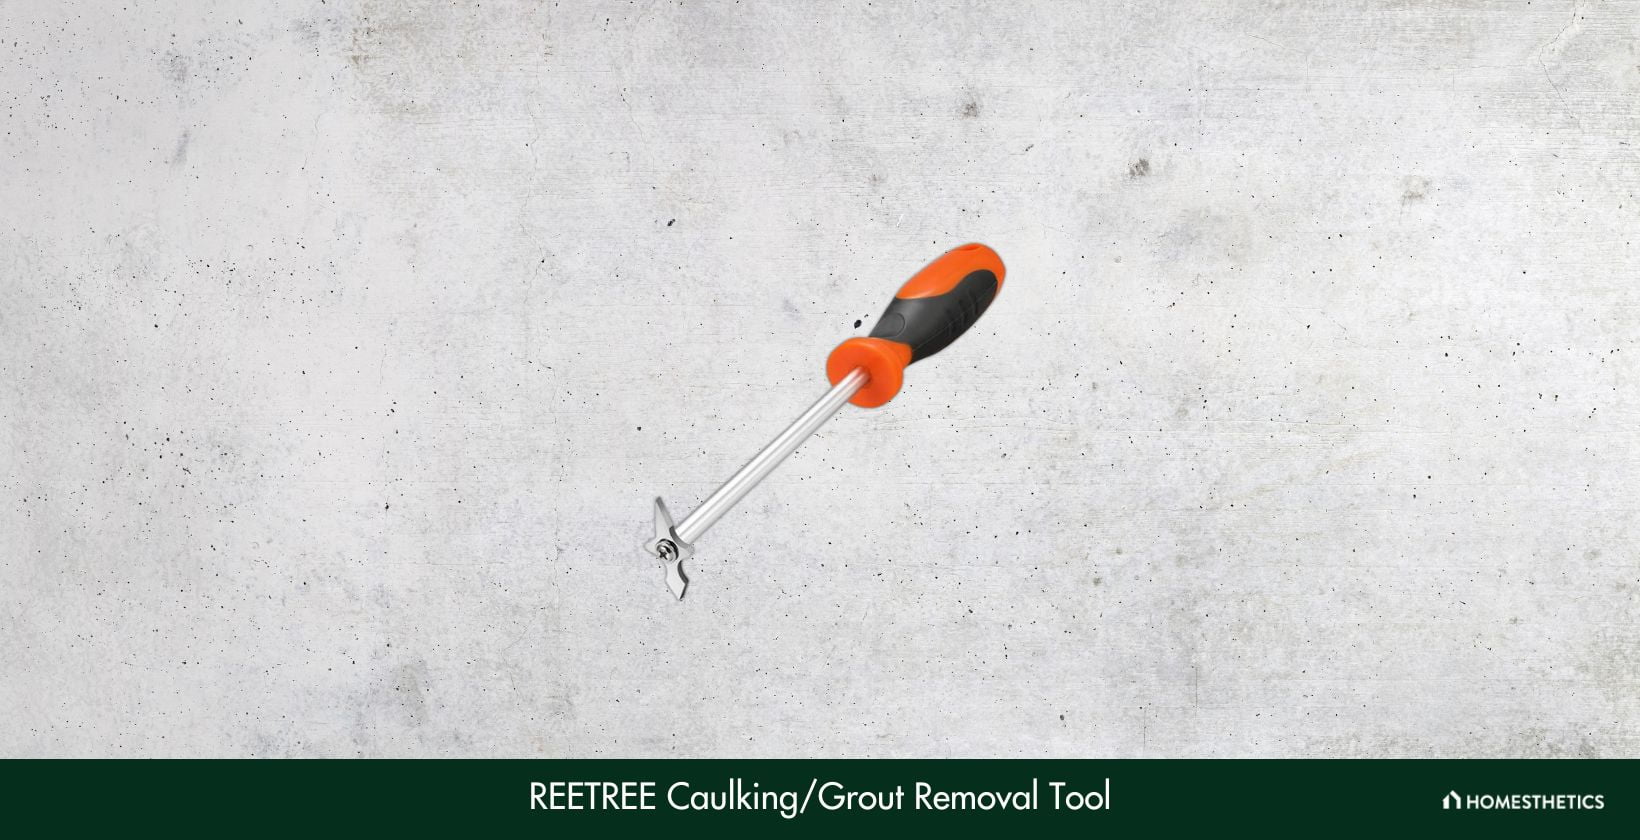 REETREE Caulking Grout Removal Tool